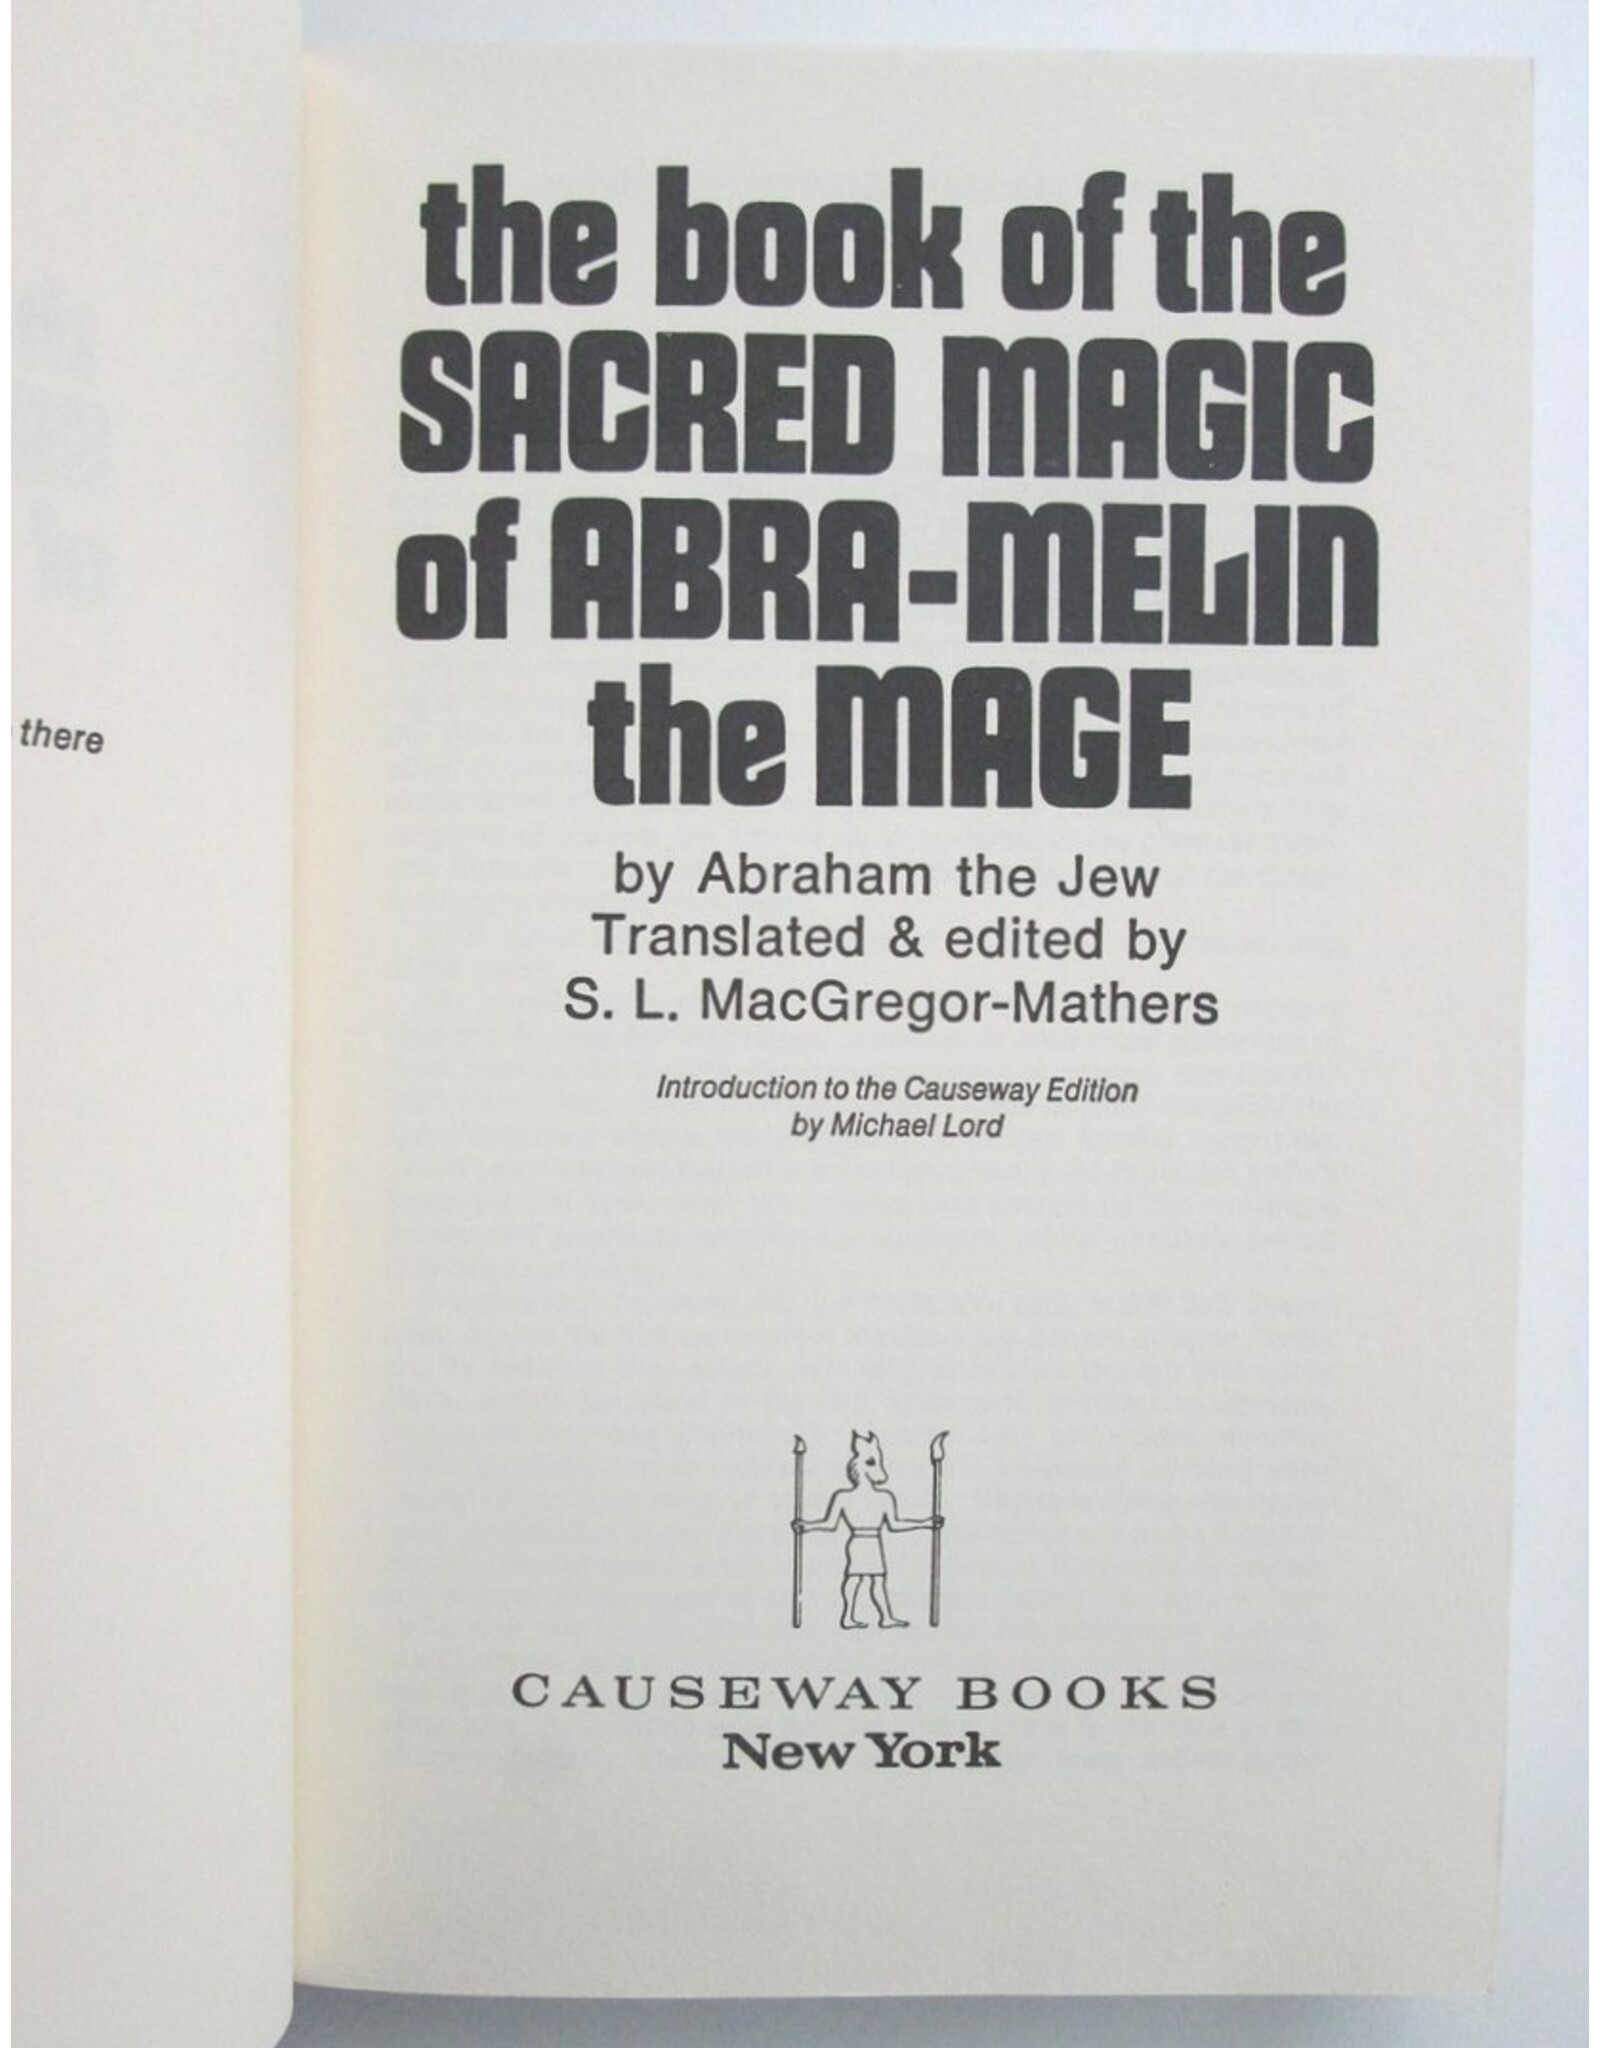 Abraham the Jew - The Book of the Sacred Magic of Abra-Melin the Mage. Translated and edited by S.L. MacGregor Mathers.  [...]